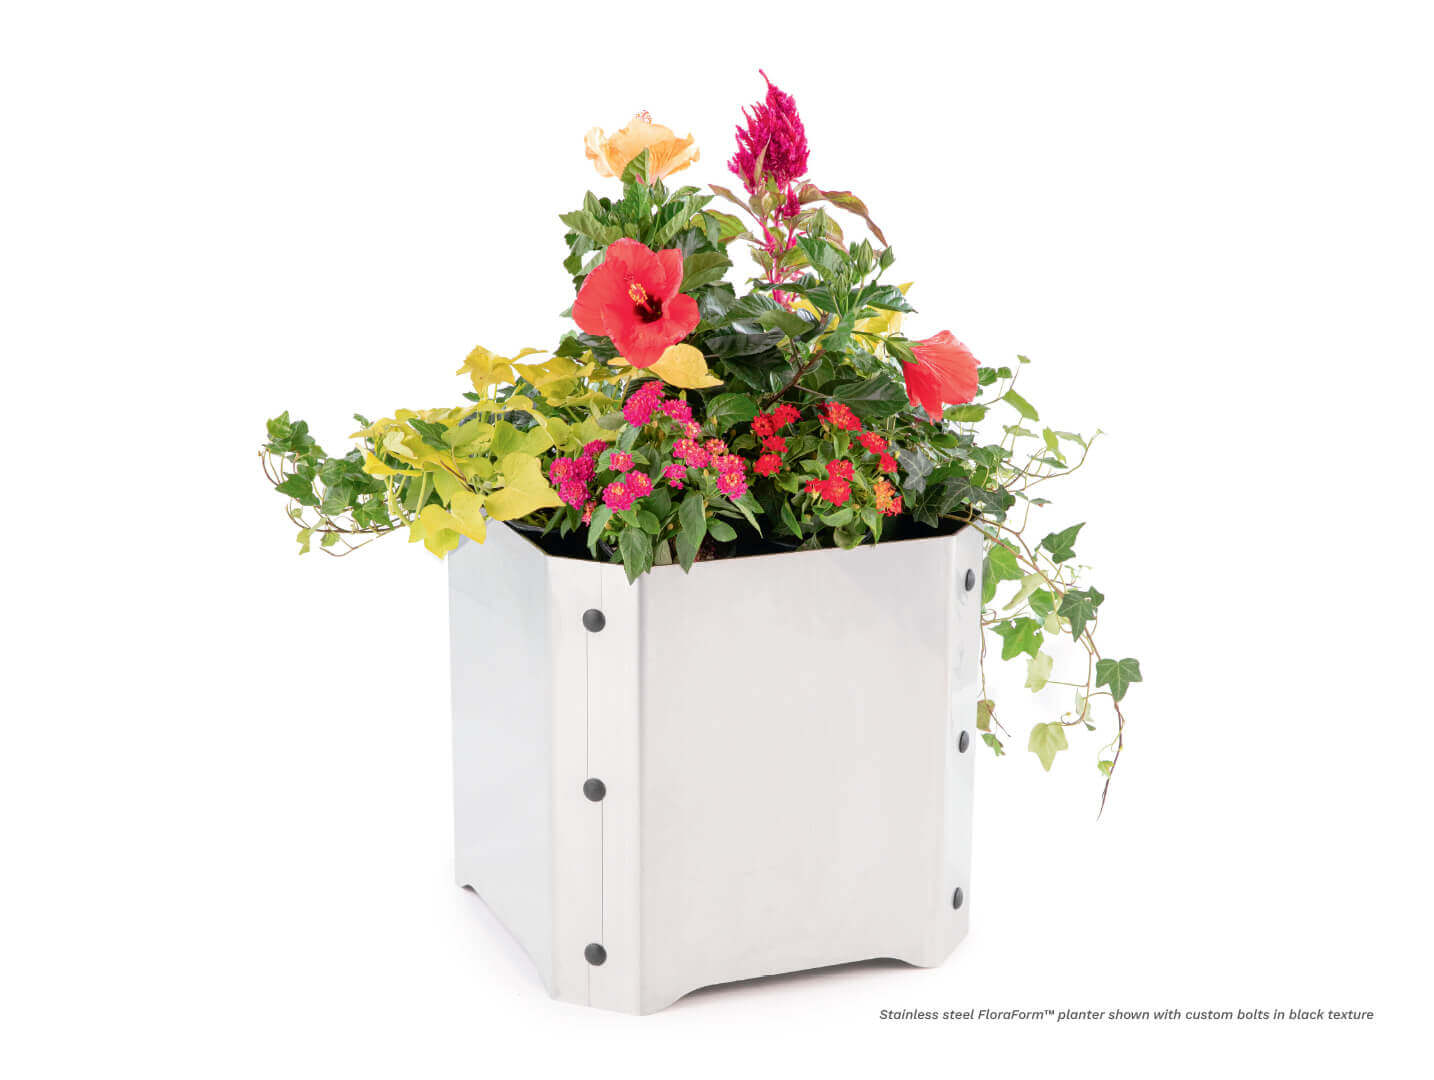 stainless steel FloraForm planter with custom bolts in black texture